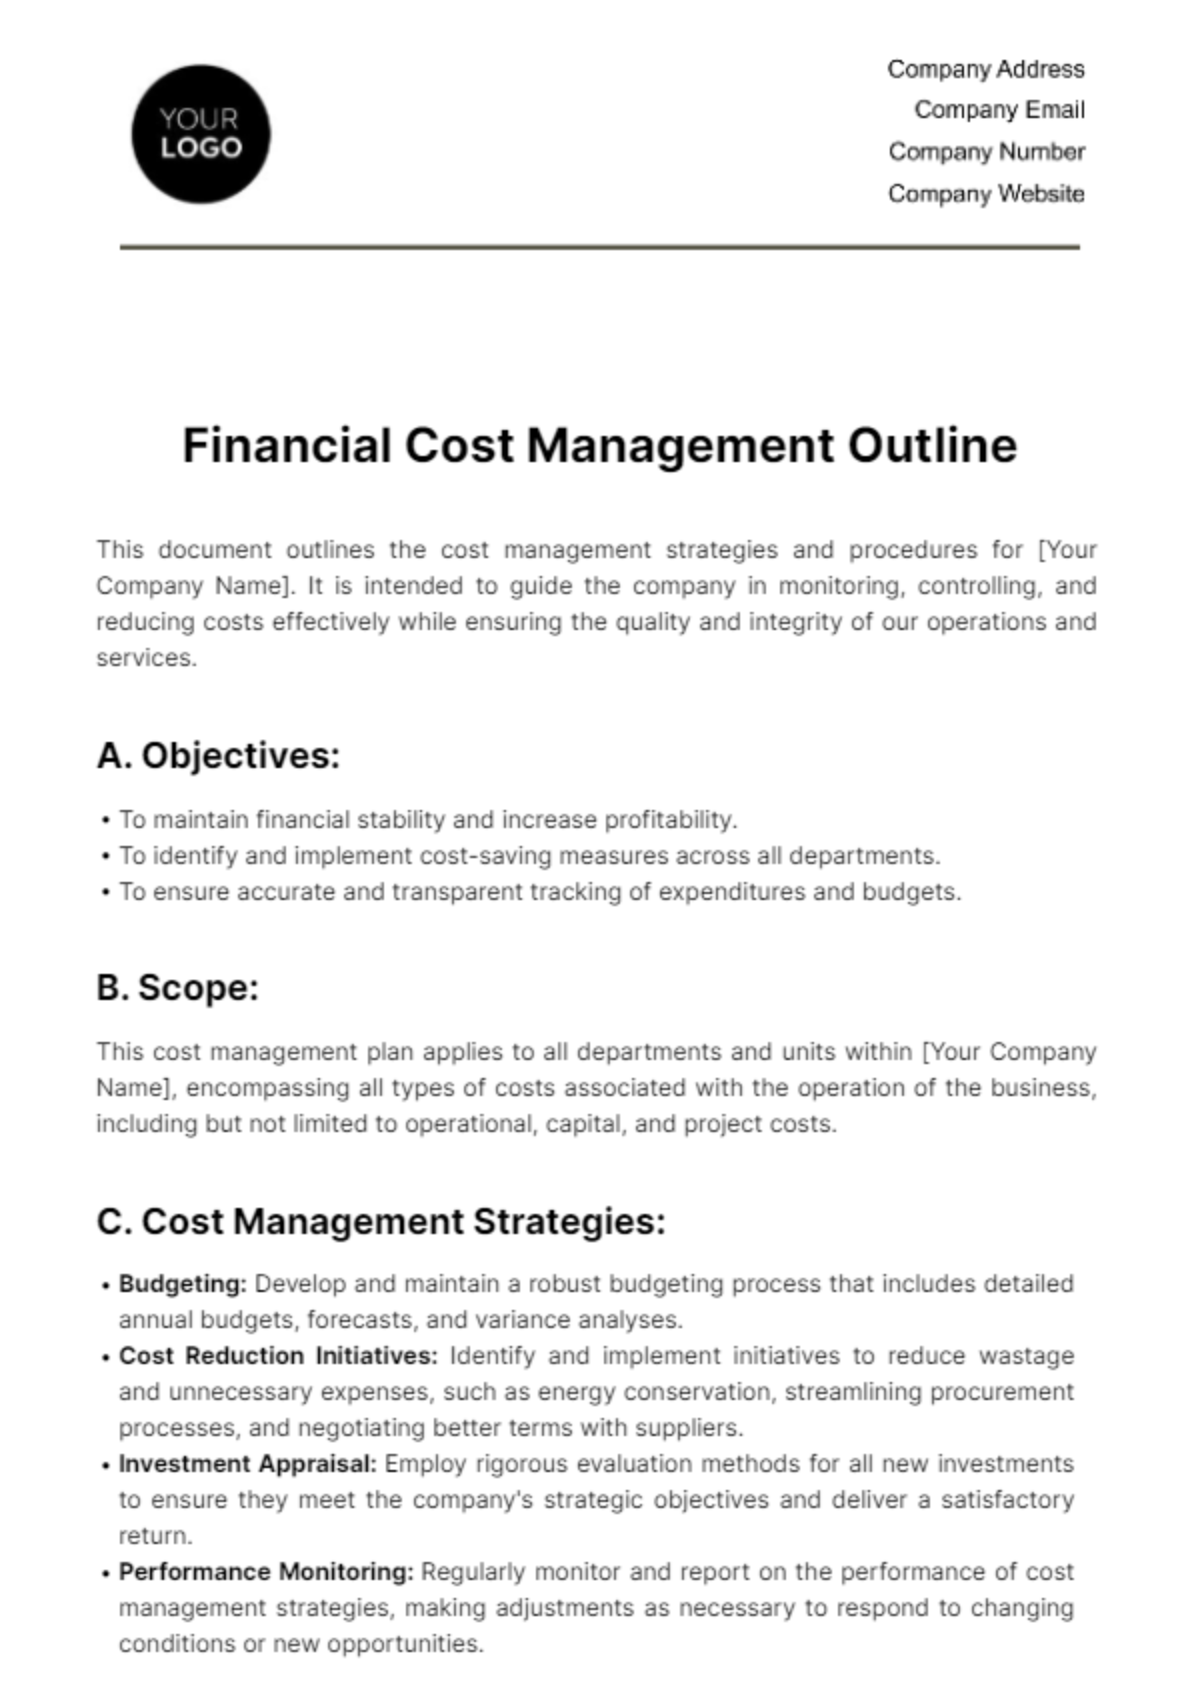 Financial Cost Management Outline Template